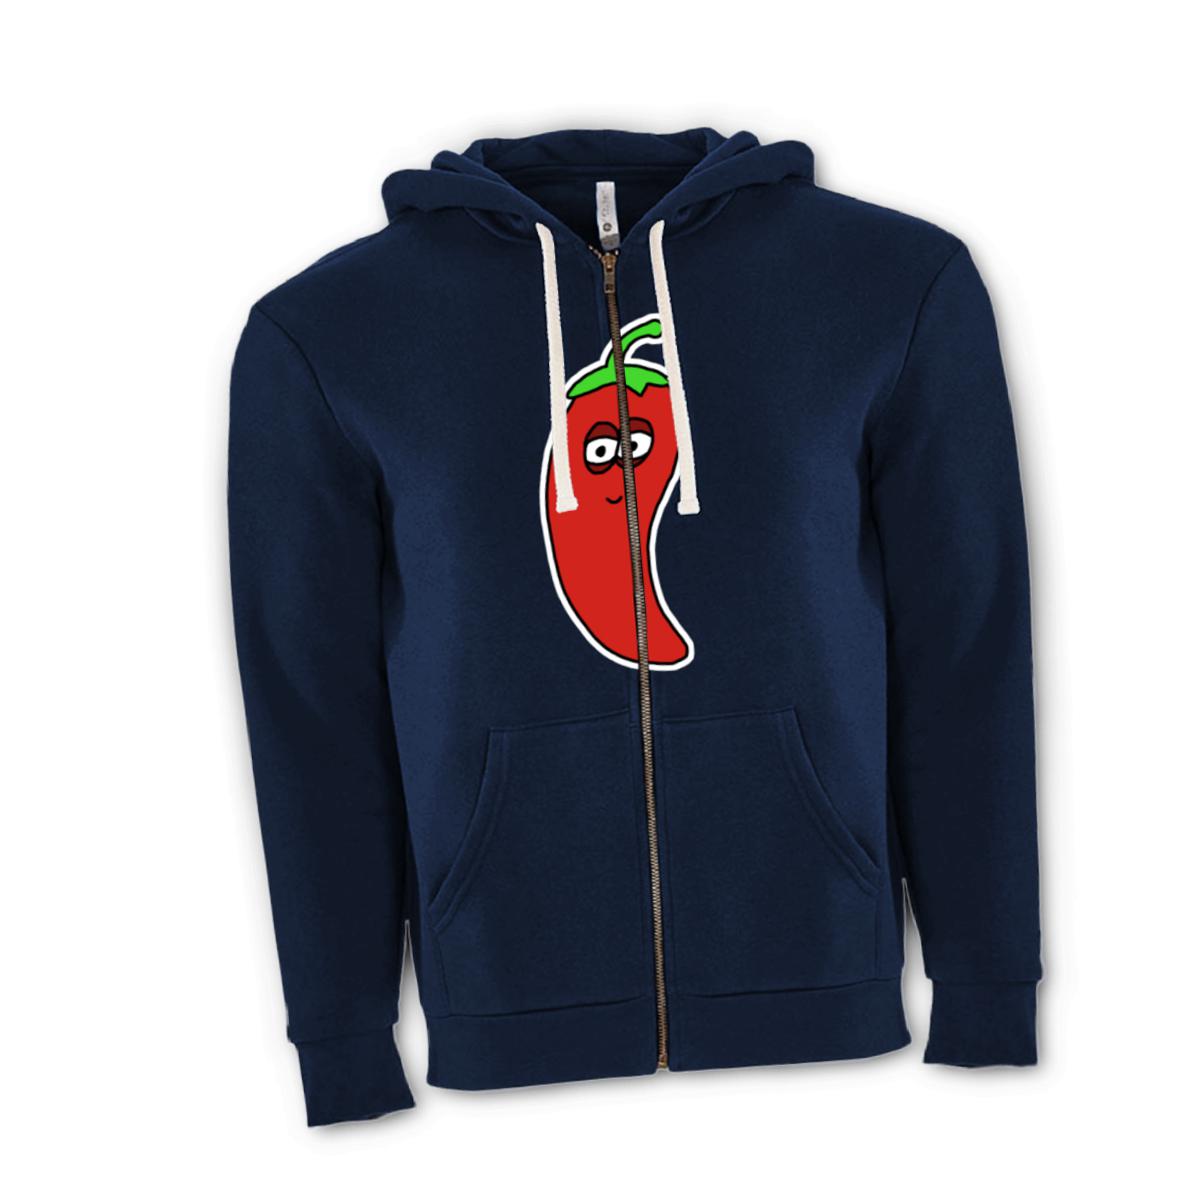 Chili Pepper Unisex Zip Hoodie Double Extra Large midnight-navy